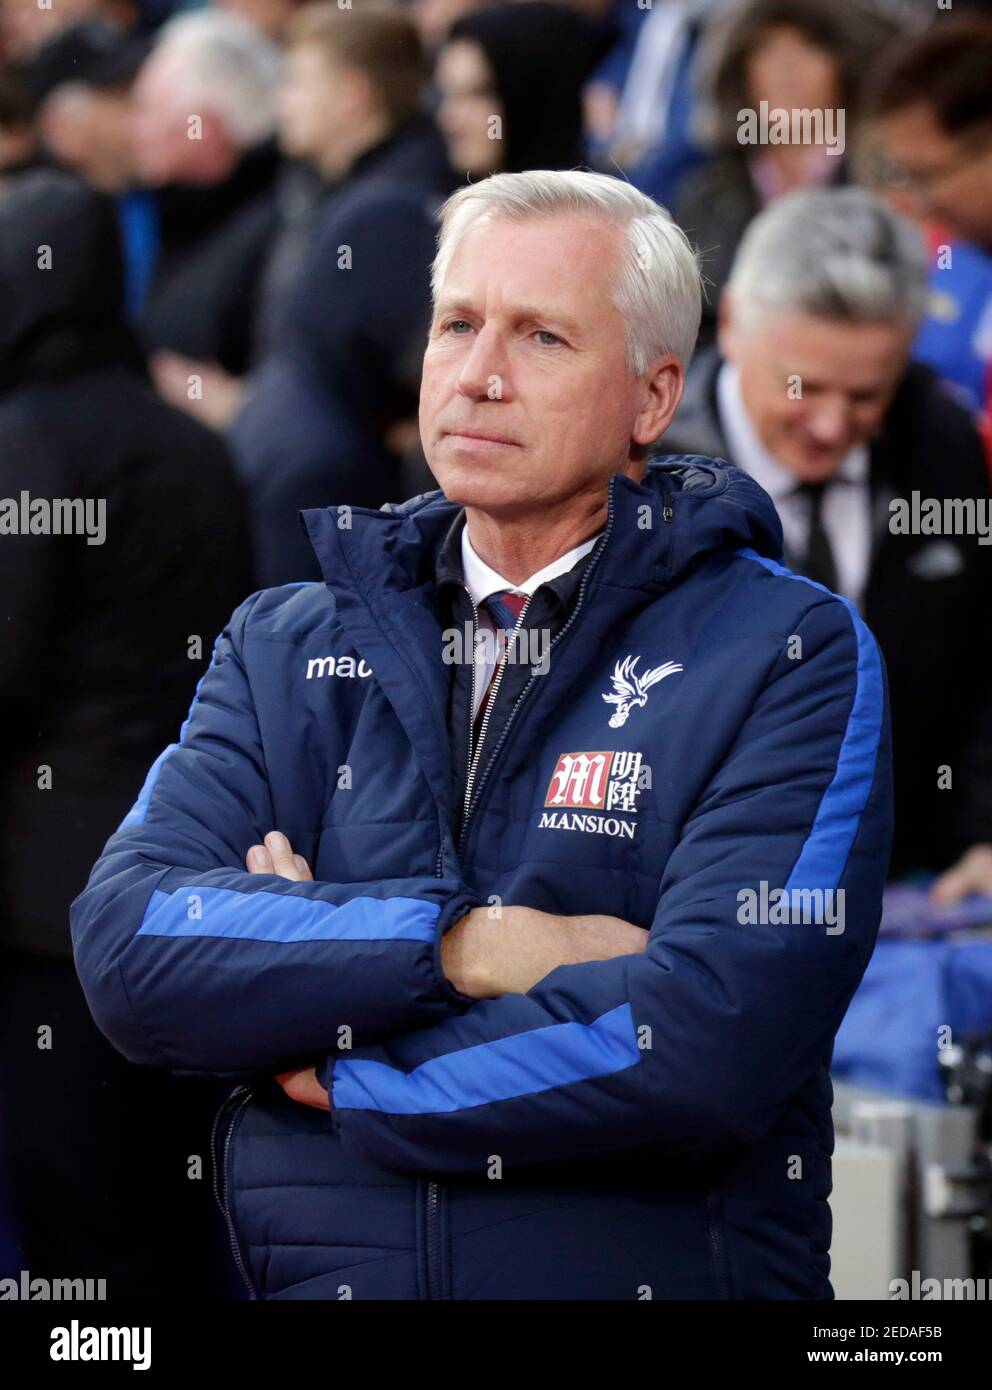 Britain Football Soccer - Crystal Palace v West Ham United - Premier League - Selhurst Park - 15/10/16 Crystal Palace manager Alan Pardew  Reuters / Paul Hackett Livepic EDITORIAL USE ONLY. No use with unauthorized audio, video, data, fixture lists, club/league logos or 'live' services. Online in-match use limited to 45 images, no video emulation. No use in betting, games or single club/league/player publications. Please contact your account representative for further details. Stock Photo